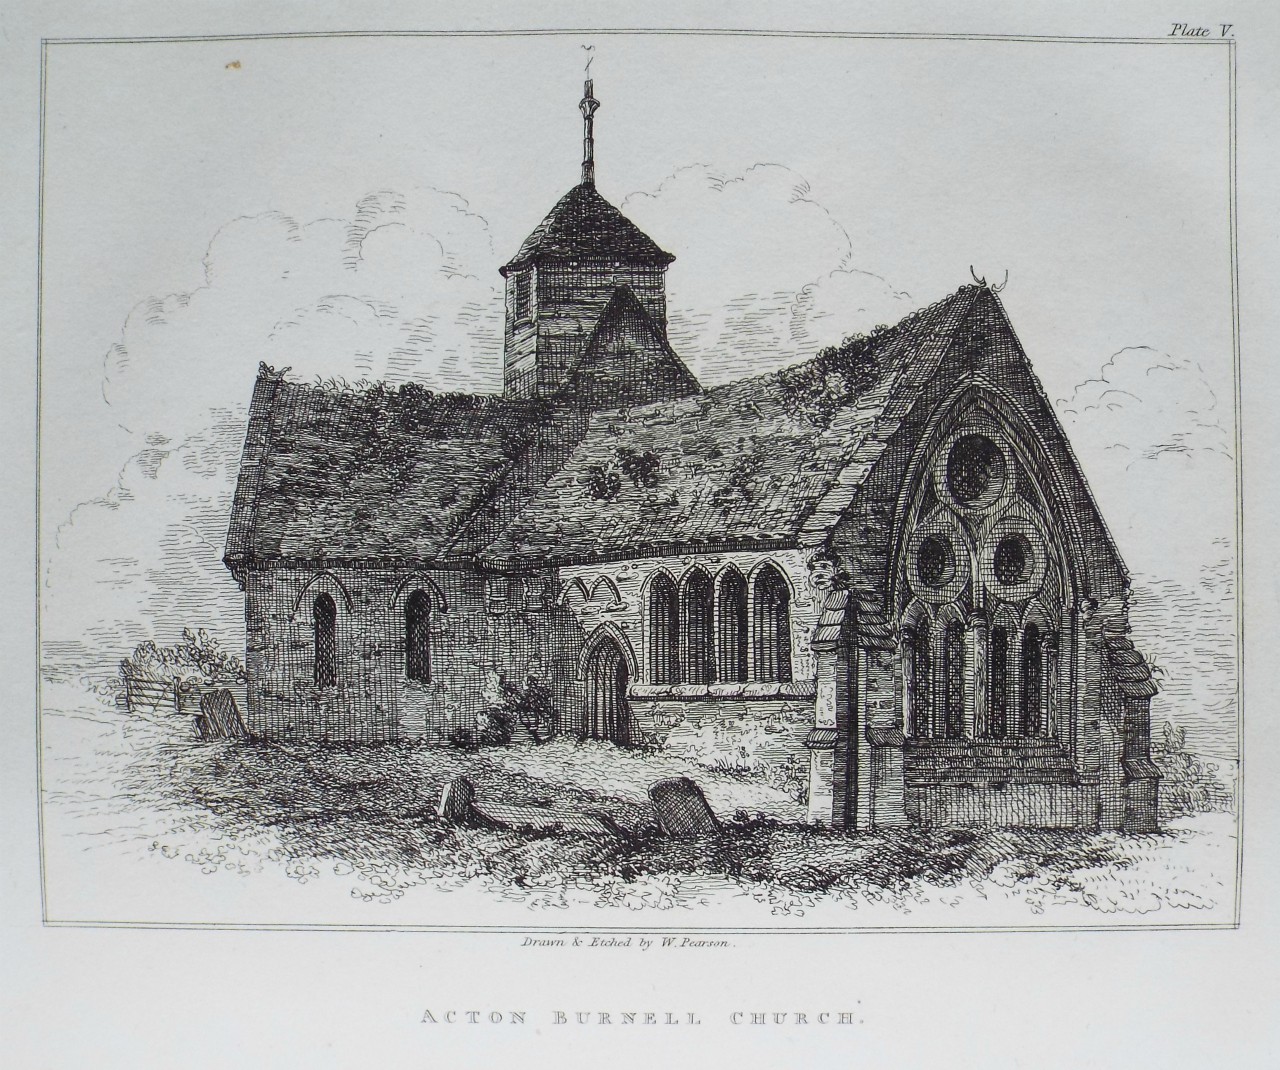 Etching - Acton Burnell Church. - Pearson